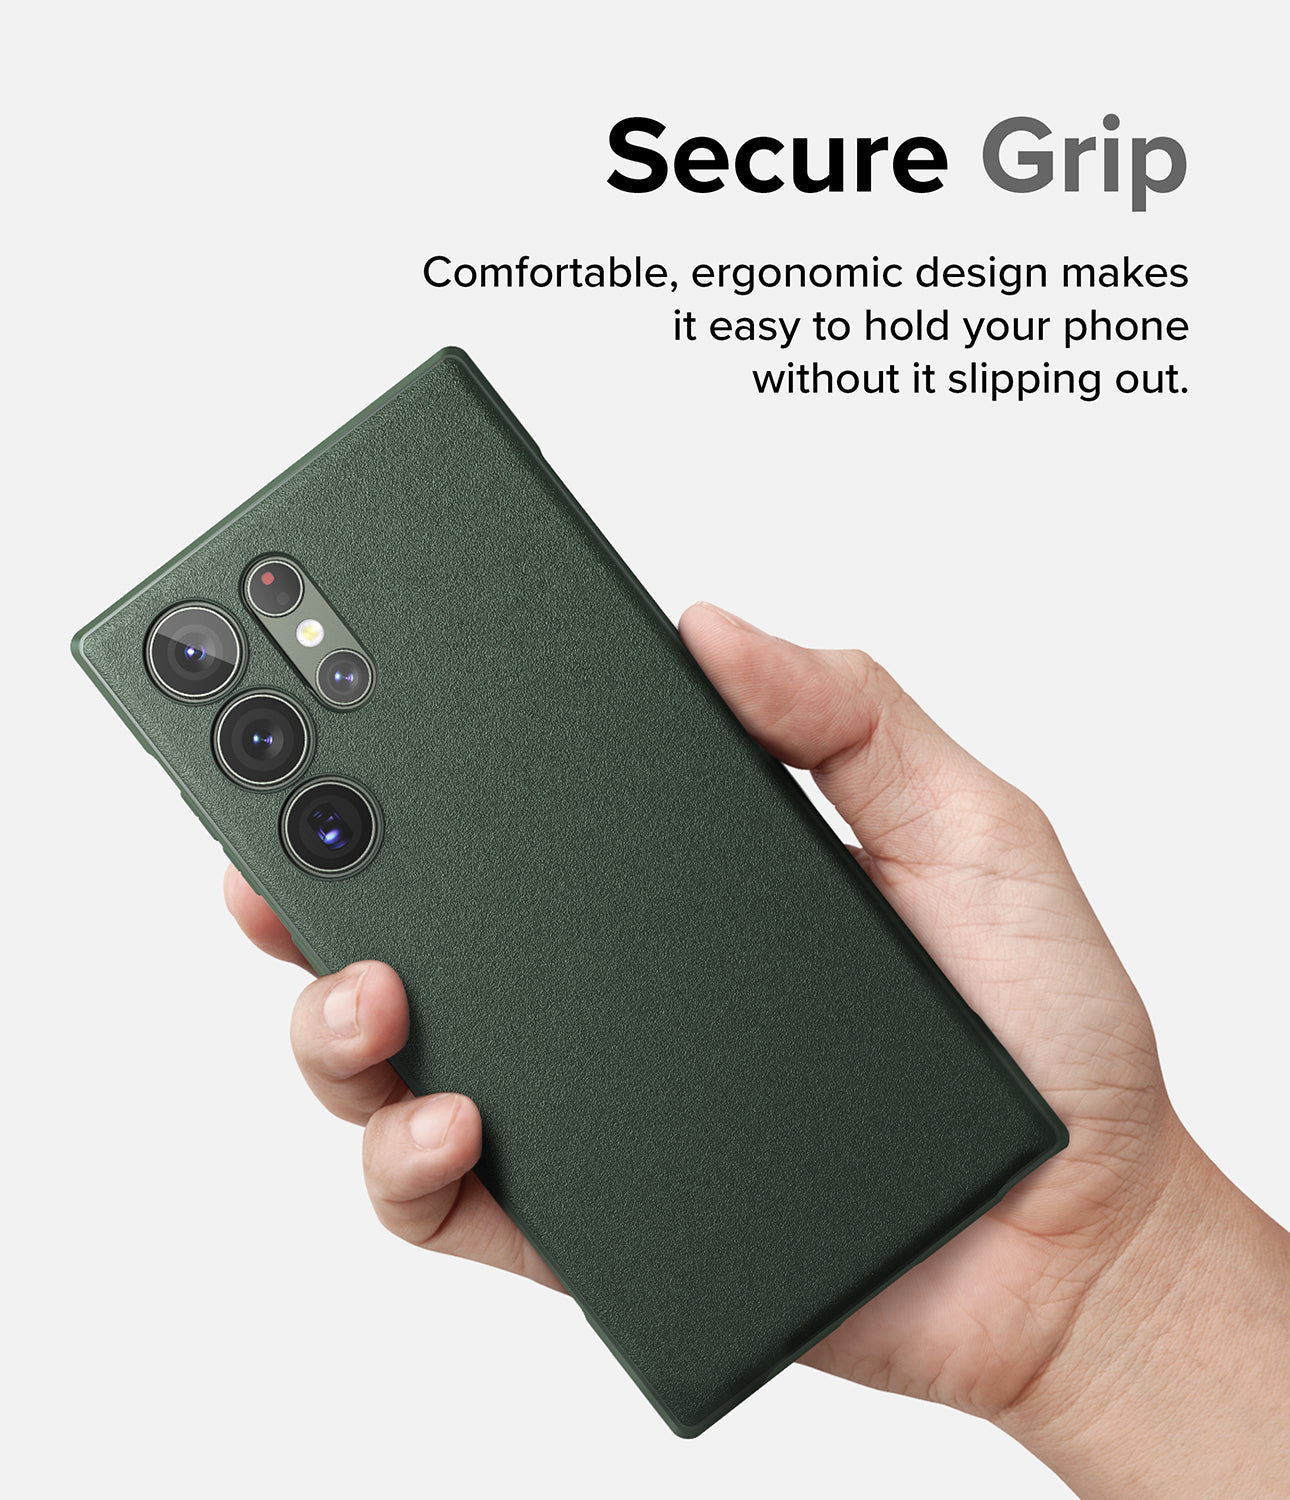 Galaxy S23 Ultra Case | Onyx - Dark Green - Secure Grip. Comfortable, ergonomic design makes it easy to hold your phone without it slipping out.